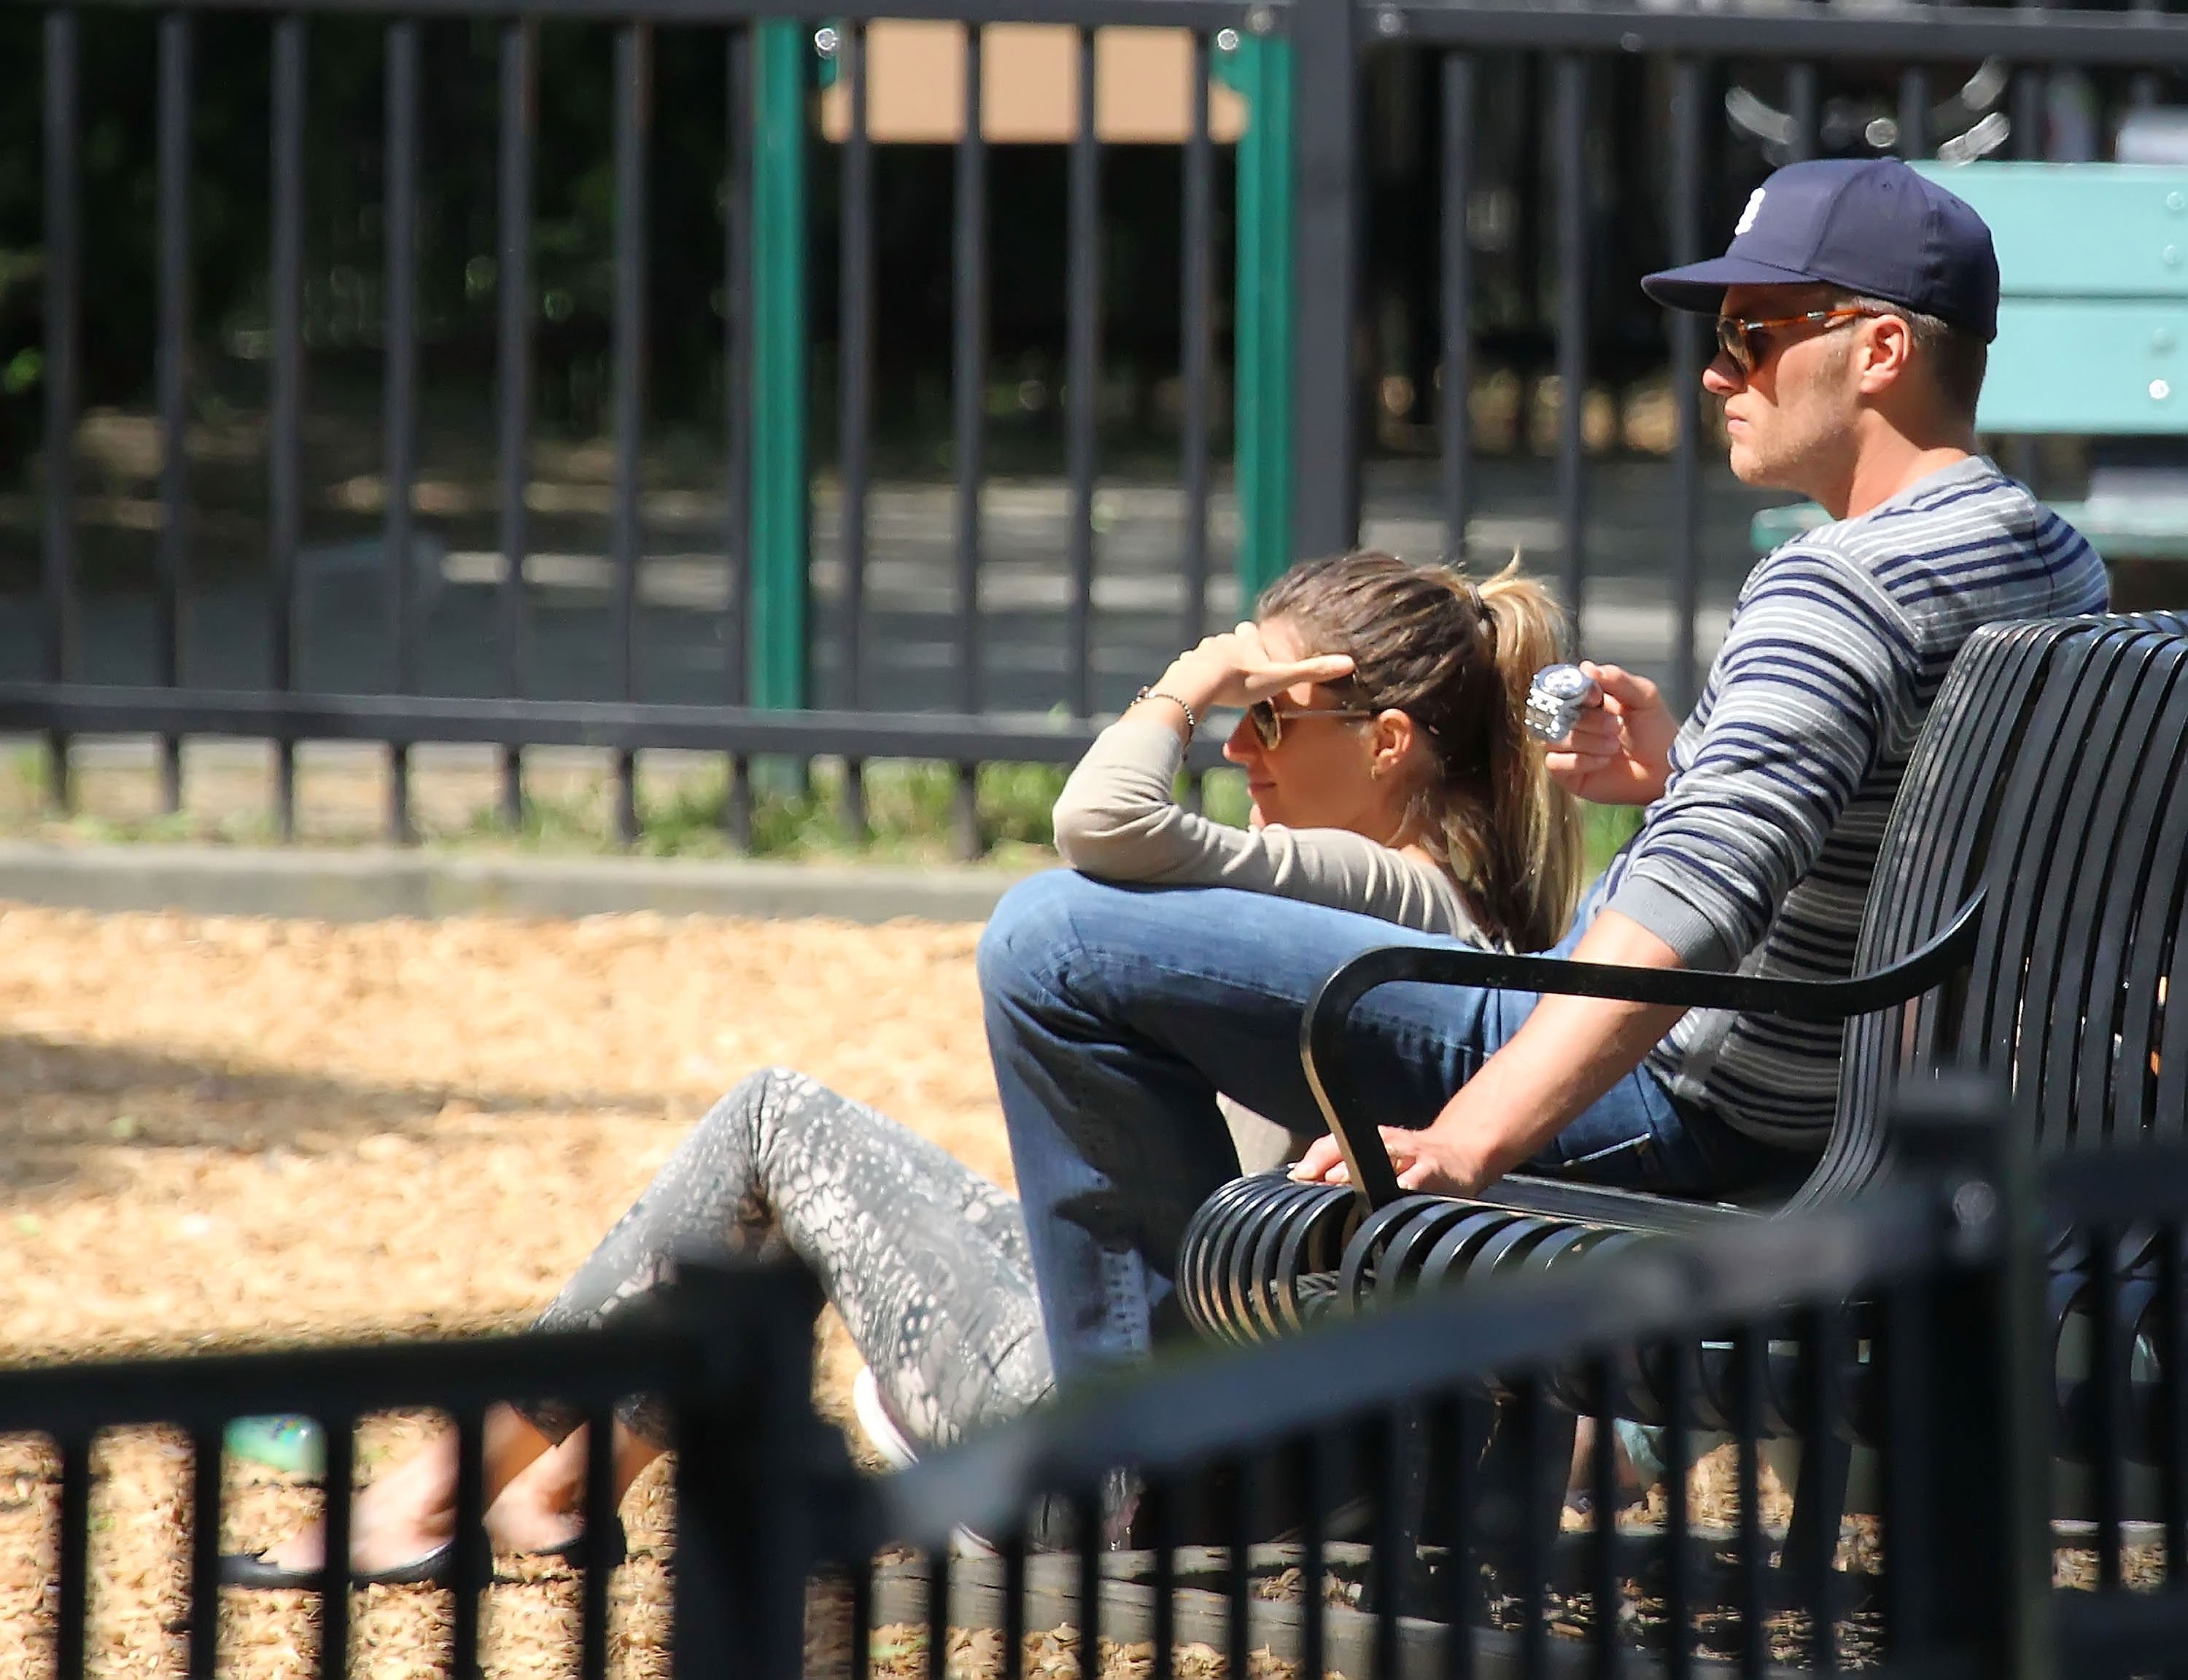 Tom Brady and his wife Gisele Bundchen are seen on June 01, 2012, in Boston, Massachusetts. | Source: Getty Images